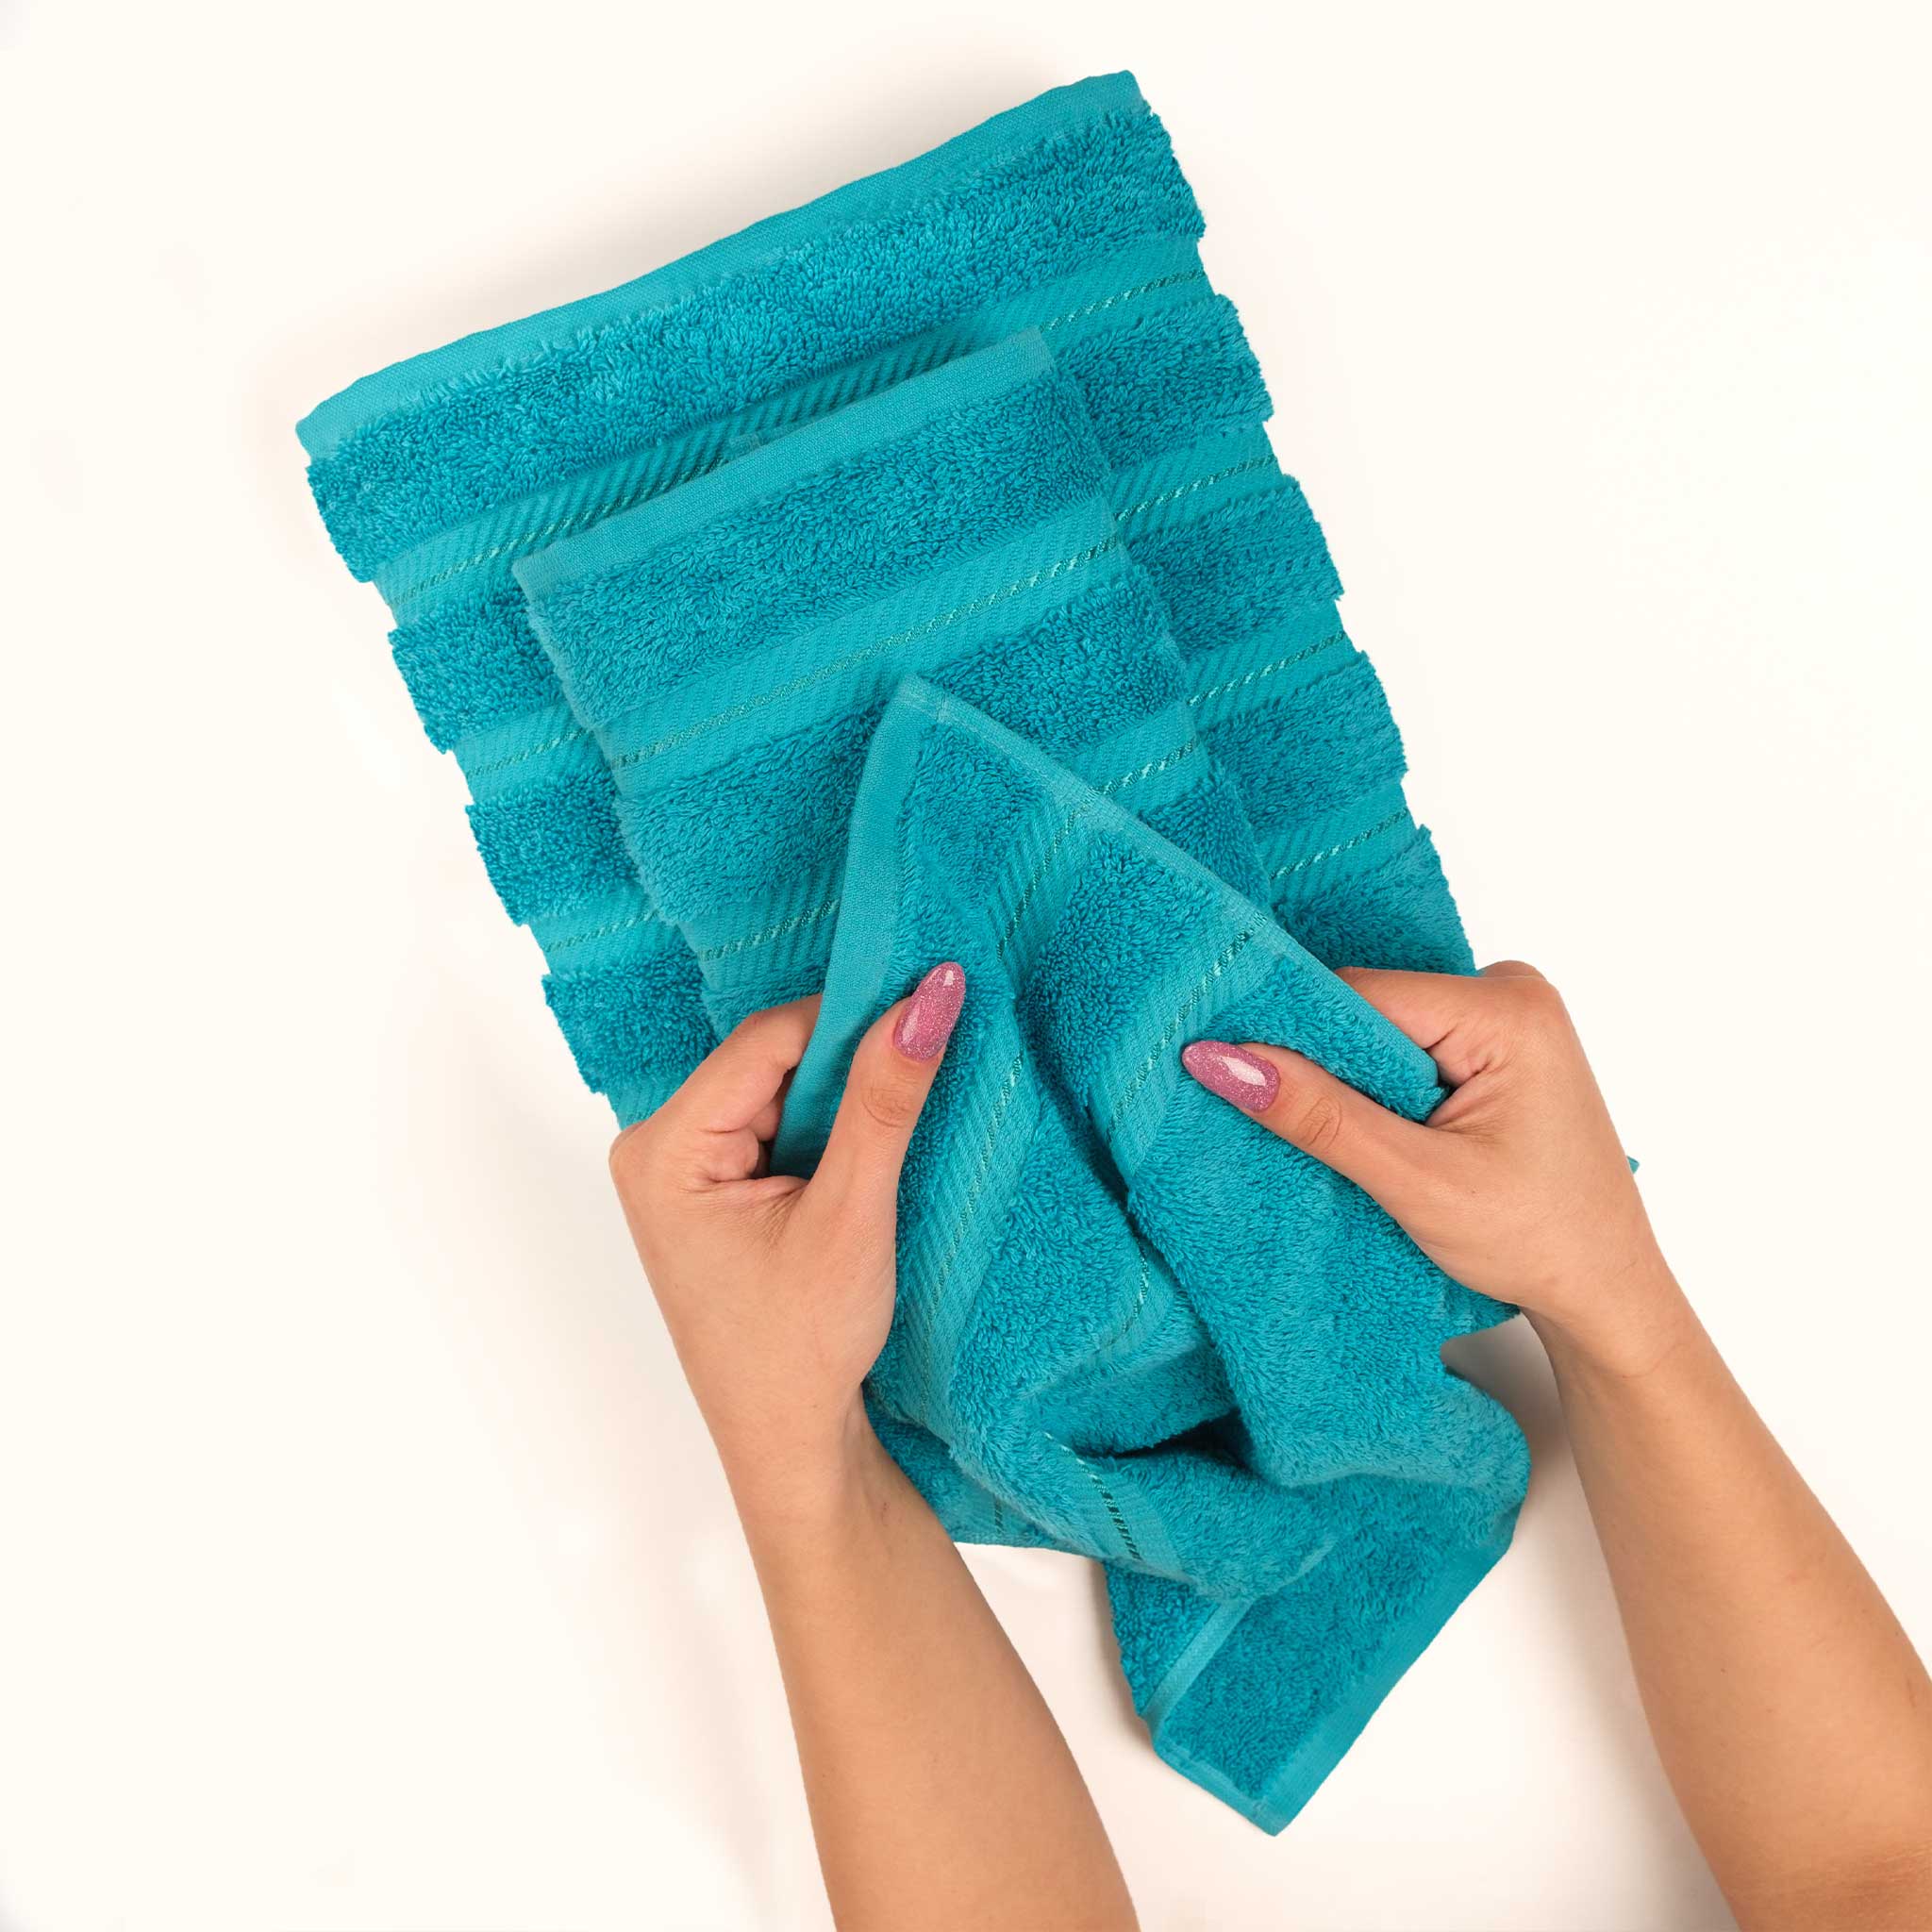 Turn Old Towels Into A Soft, Sophisticated Bath Mat